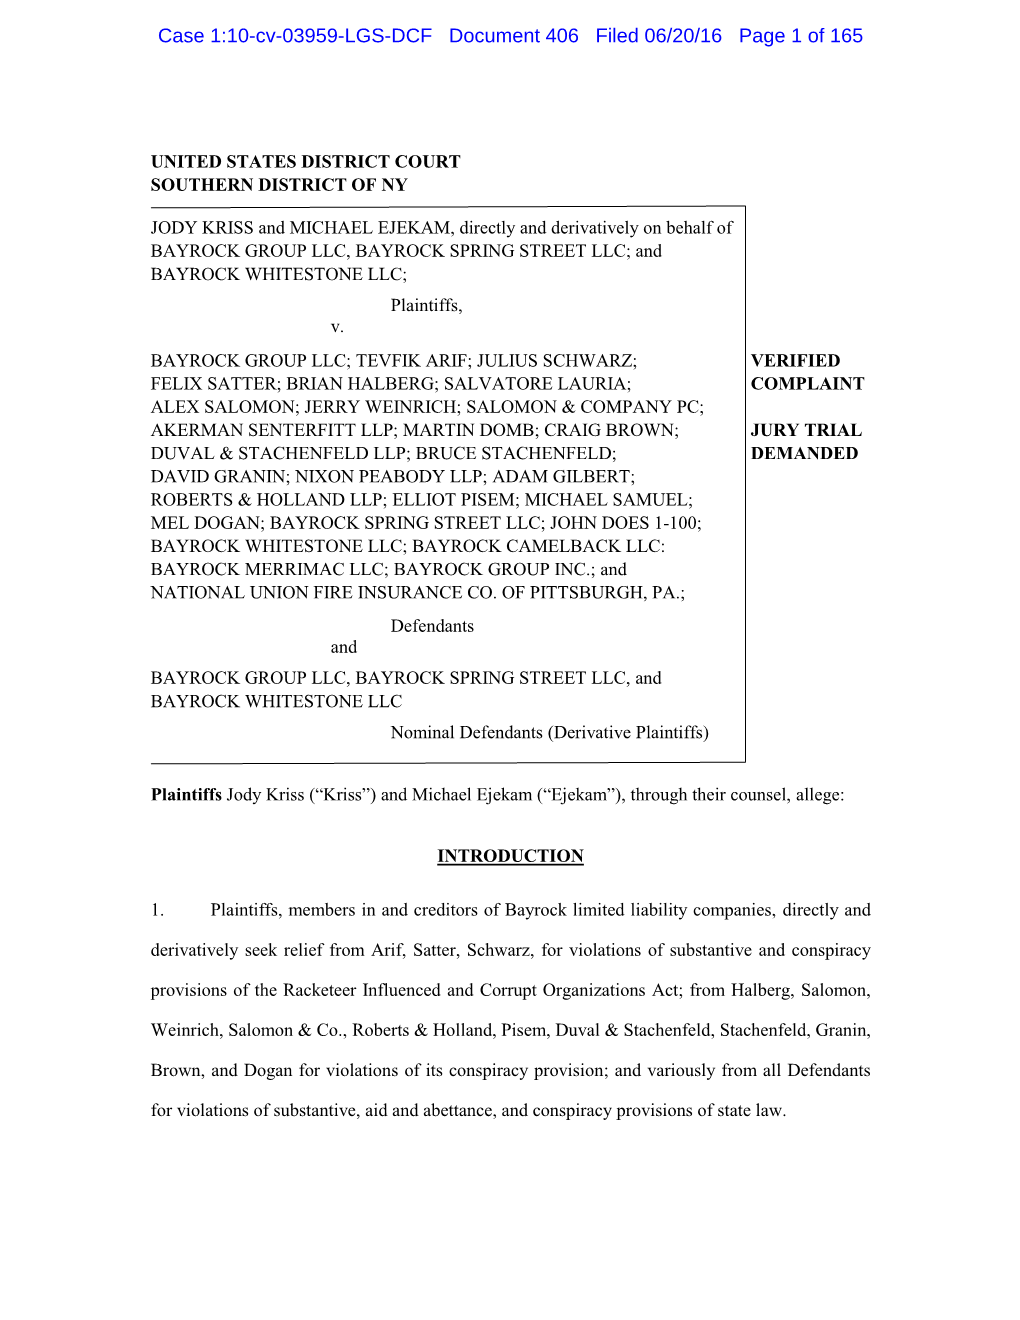 Case 1:10-Cv-03959-LGS-DCF Document 406 Filed 06/20/16 Page 1 of 165